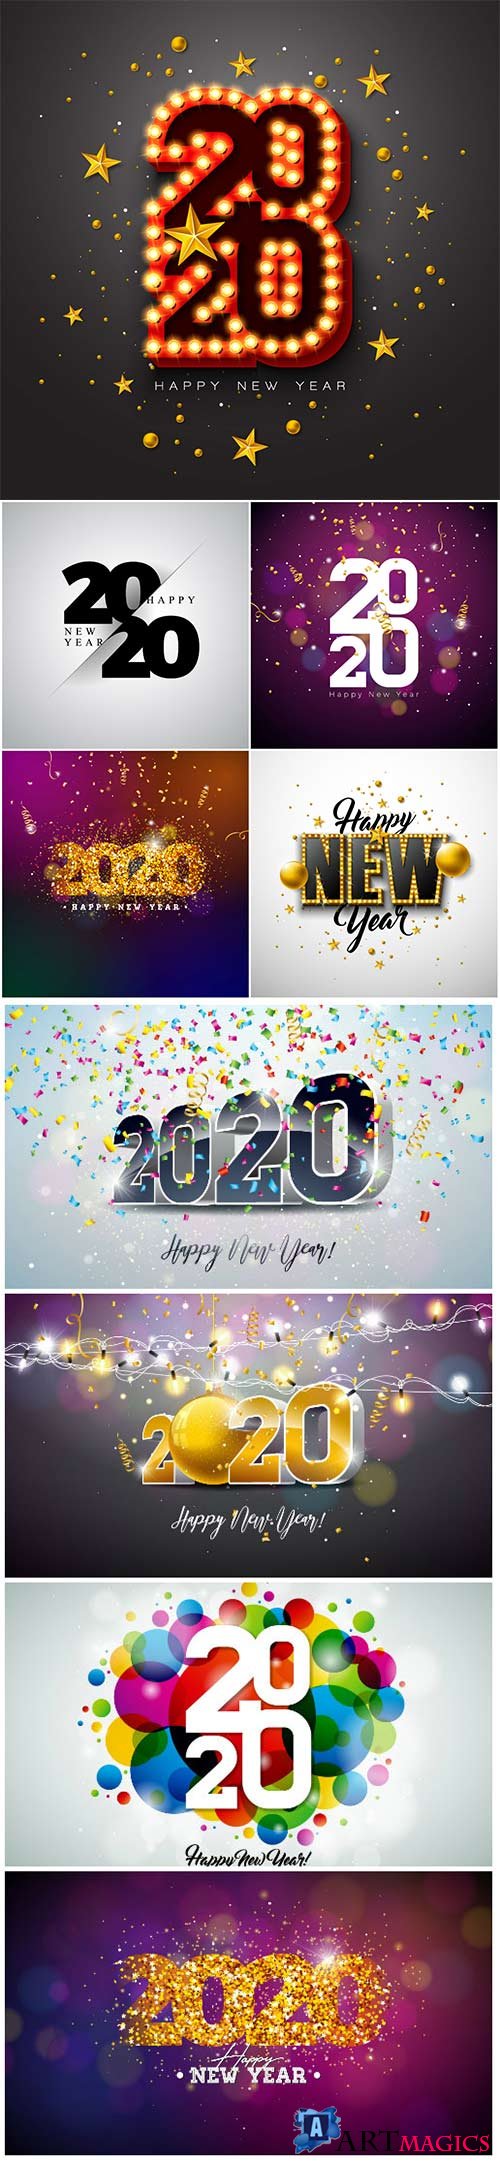 2020 Happy New Year illustration with 3d typography lettering, and